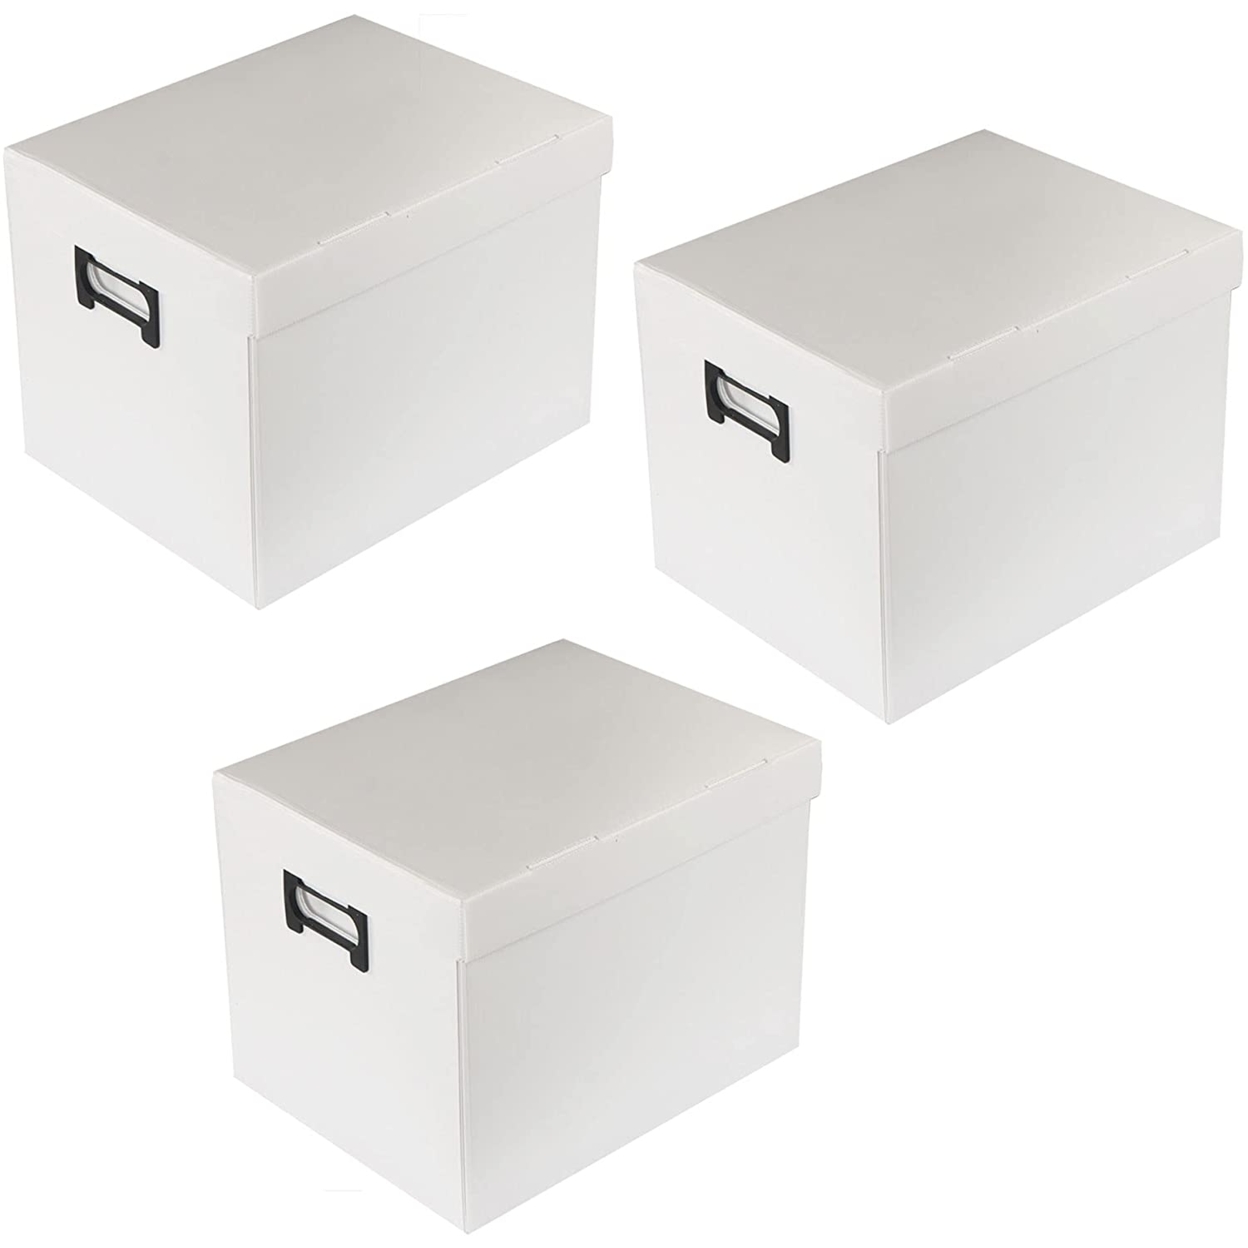 (3 Set) Vaiyer Durable Plastic Filing Storage Organizer Box with Lid, Storage Bins Baskets Containers for Home Office Cabinet for Office Use - white